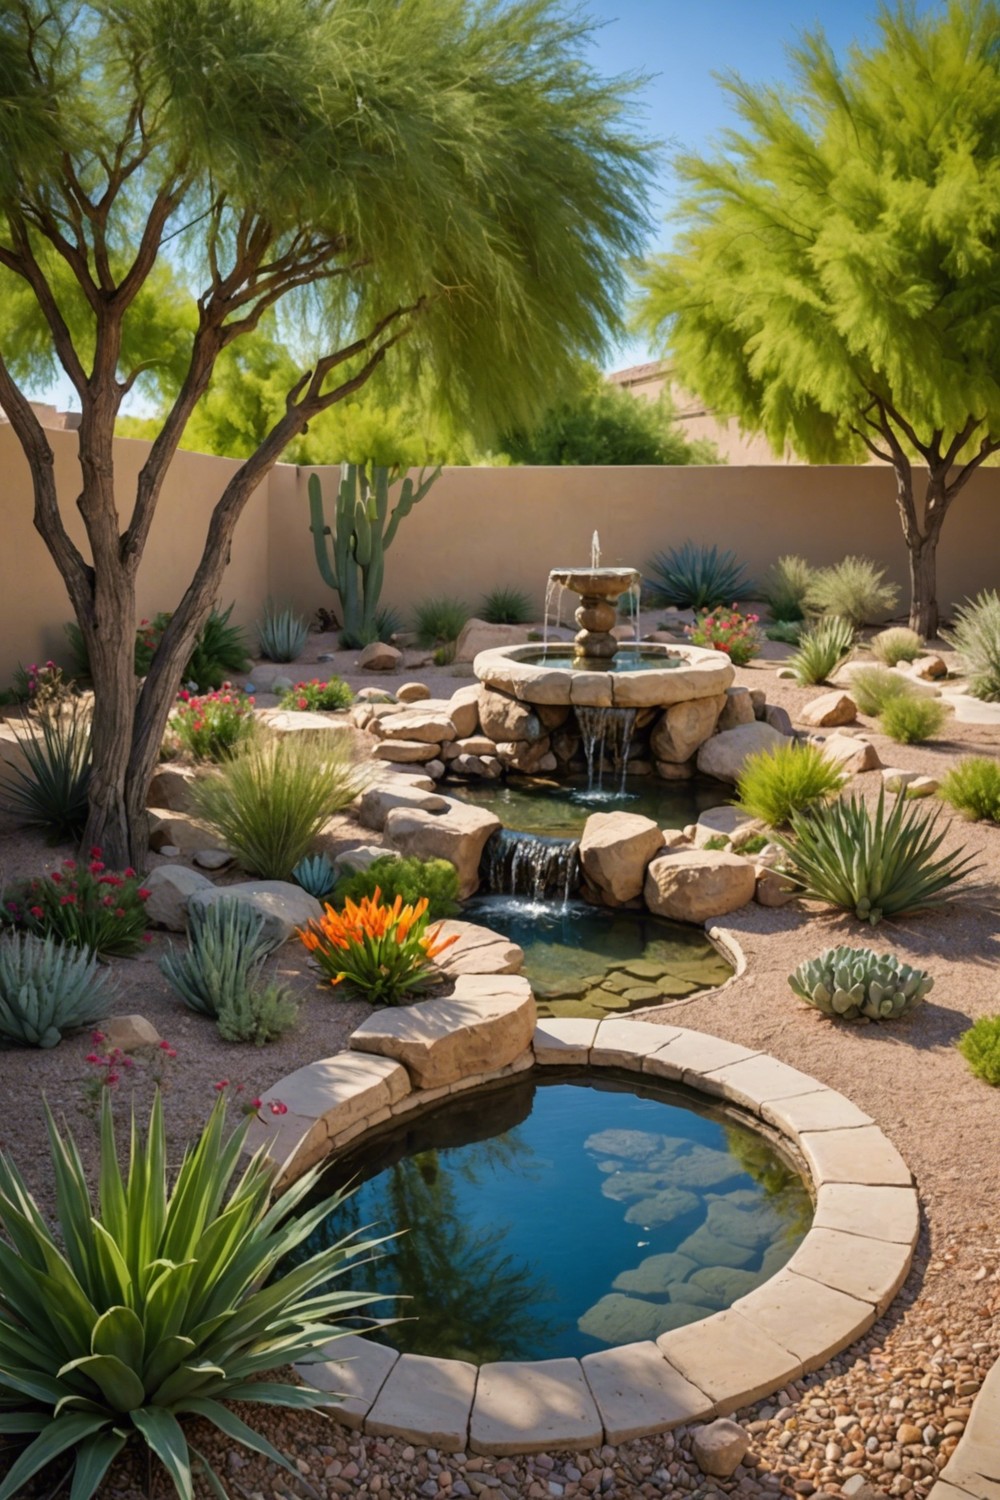 Add a Statement Piece with a Desert Water Feature